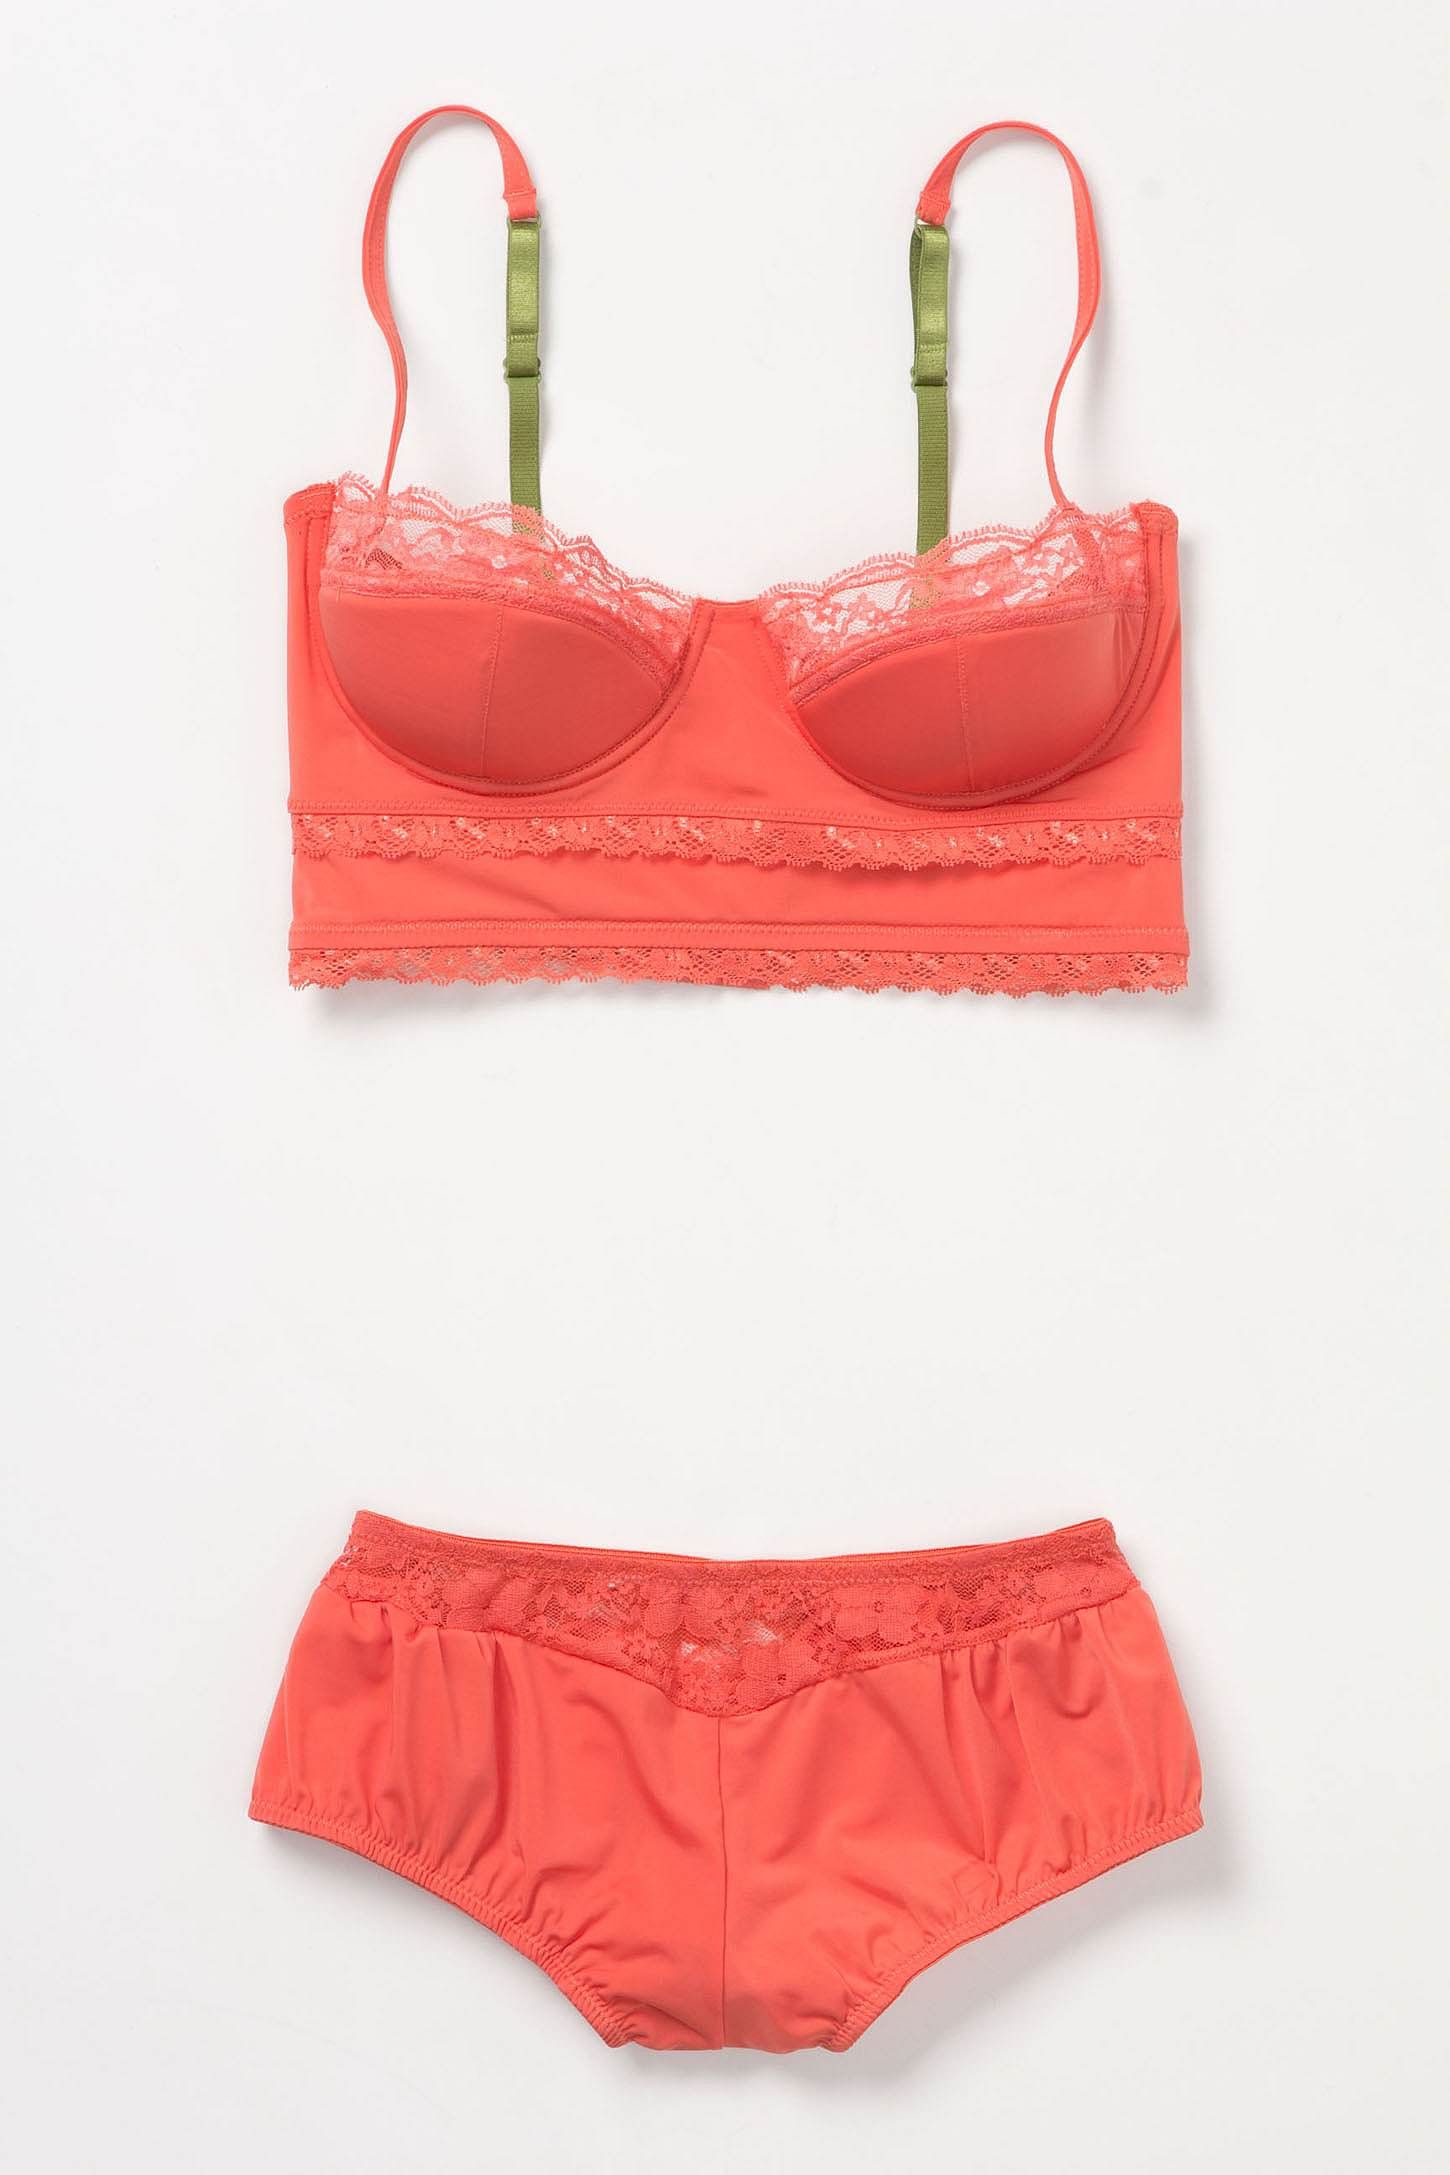 Clouded Morning Bra - Anthropologie.com | My style - haves, want and ...